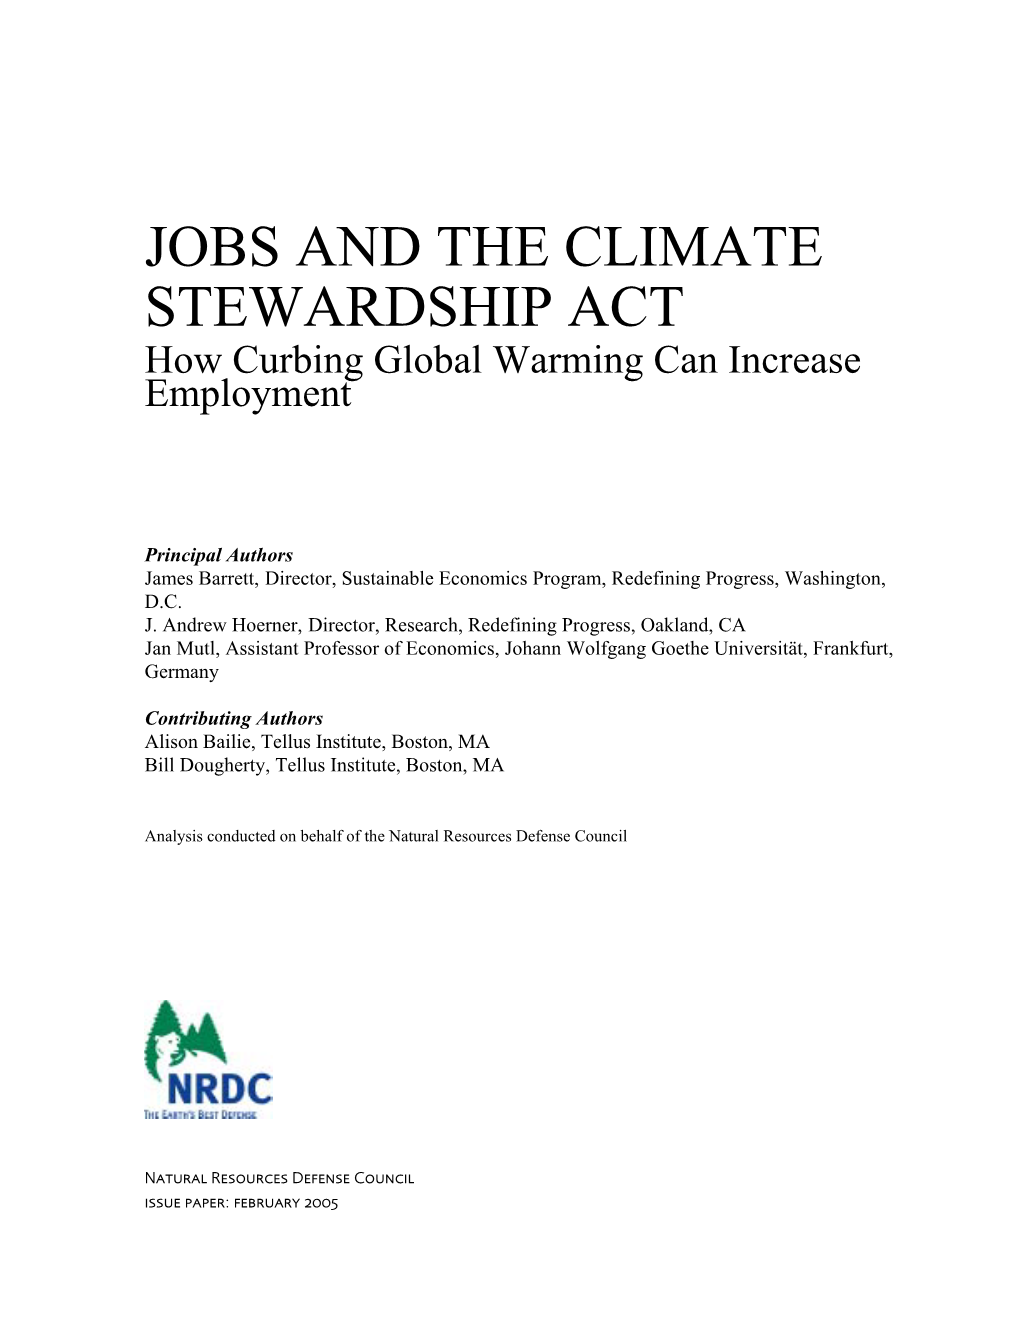 Jobs and the Climate Stewardship Act: How Curbing